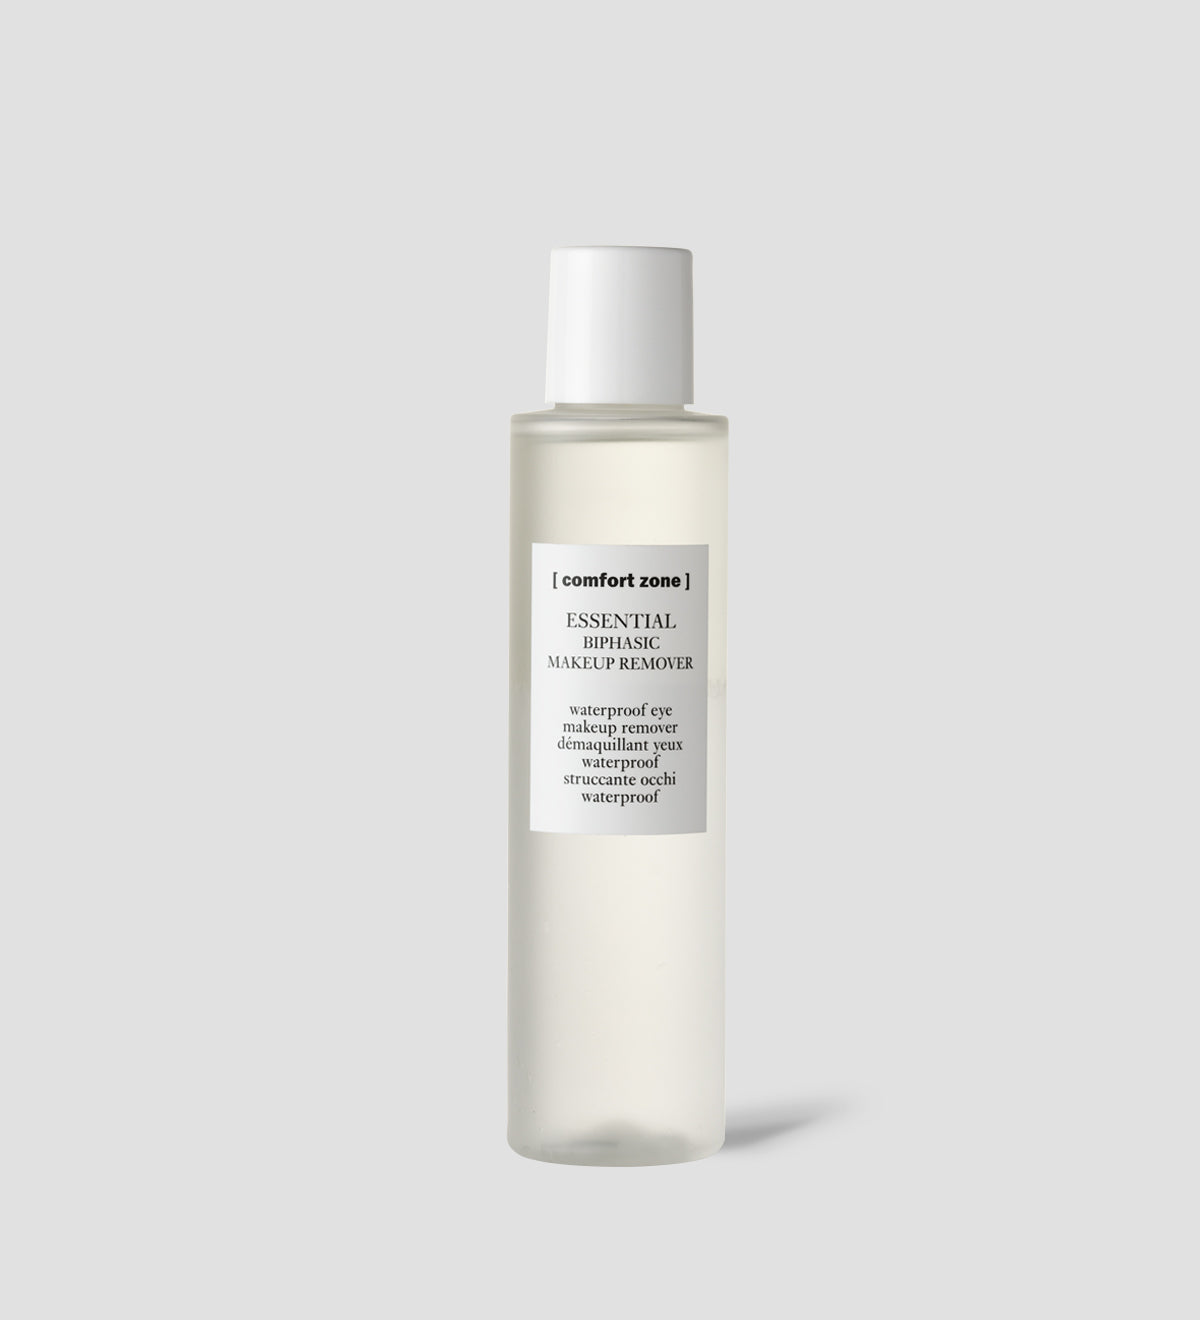 Comfort Zone: ESSENTIAL BIPHASIC MAKEUP REMOVER Struccante occhi waterproof-